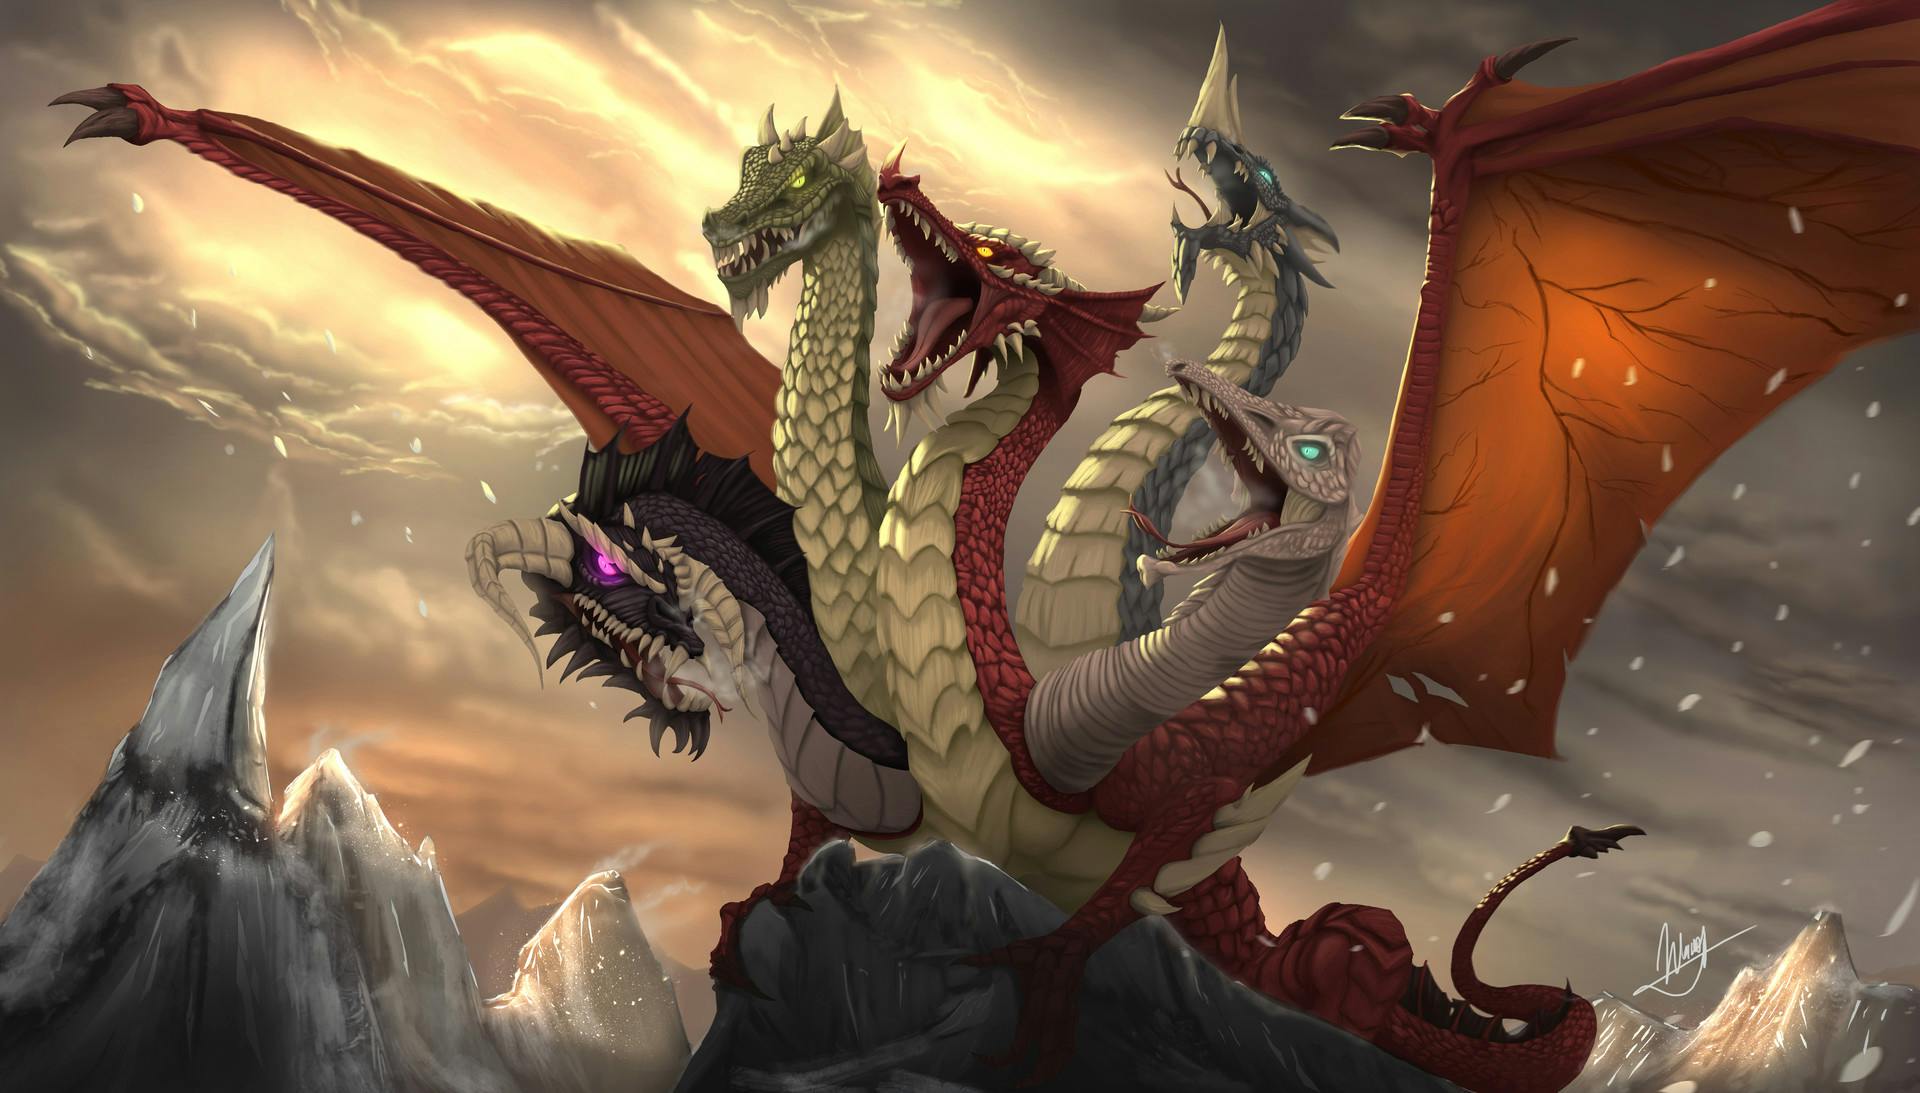 Play Dungeons & Dragons 5e Online Tyranny of Dragons